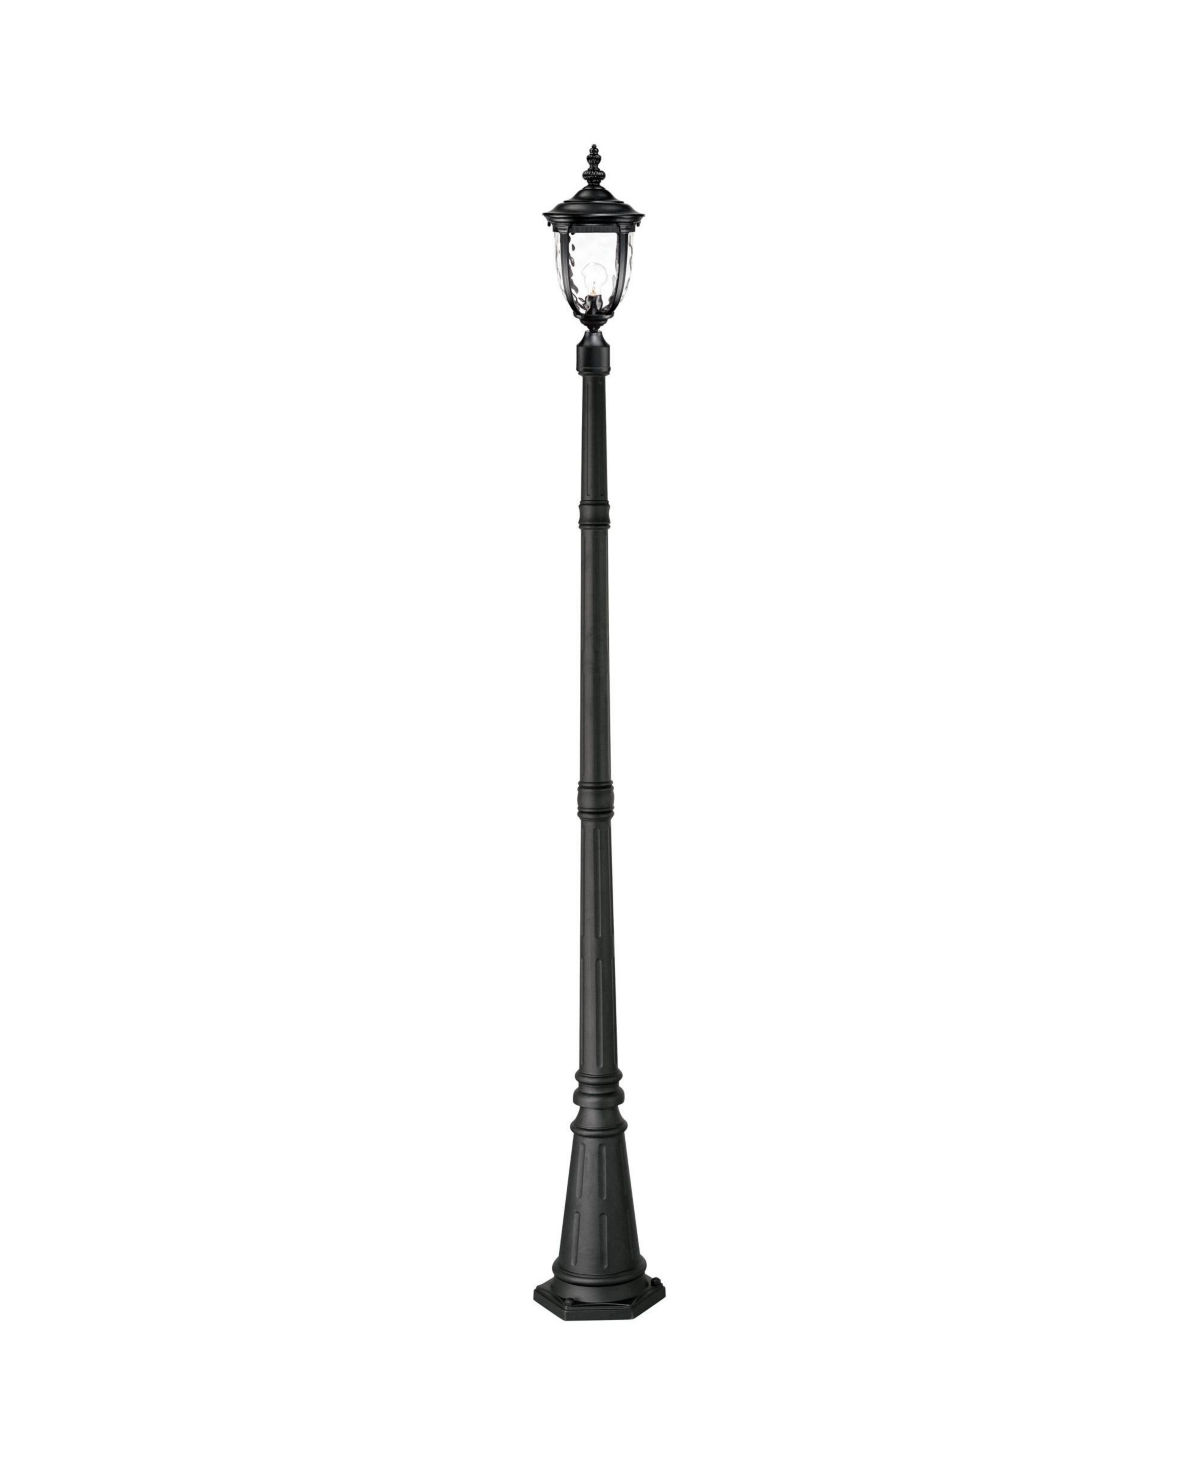 Bellagio Traditional Outdoor Post Light with Flat Base Pole Texturized Black 99 3/4" Clear Hammered Glass for Exterior House Porch Patio Outside Garde